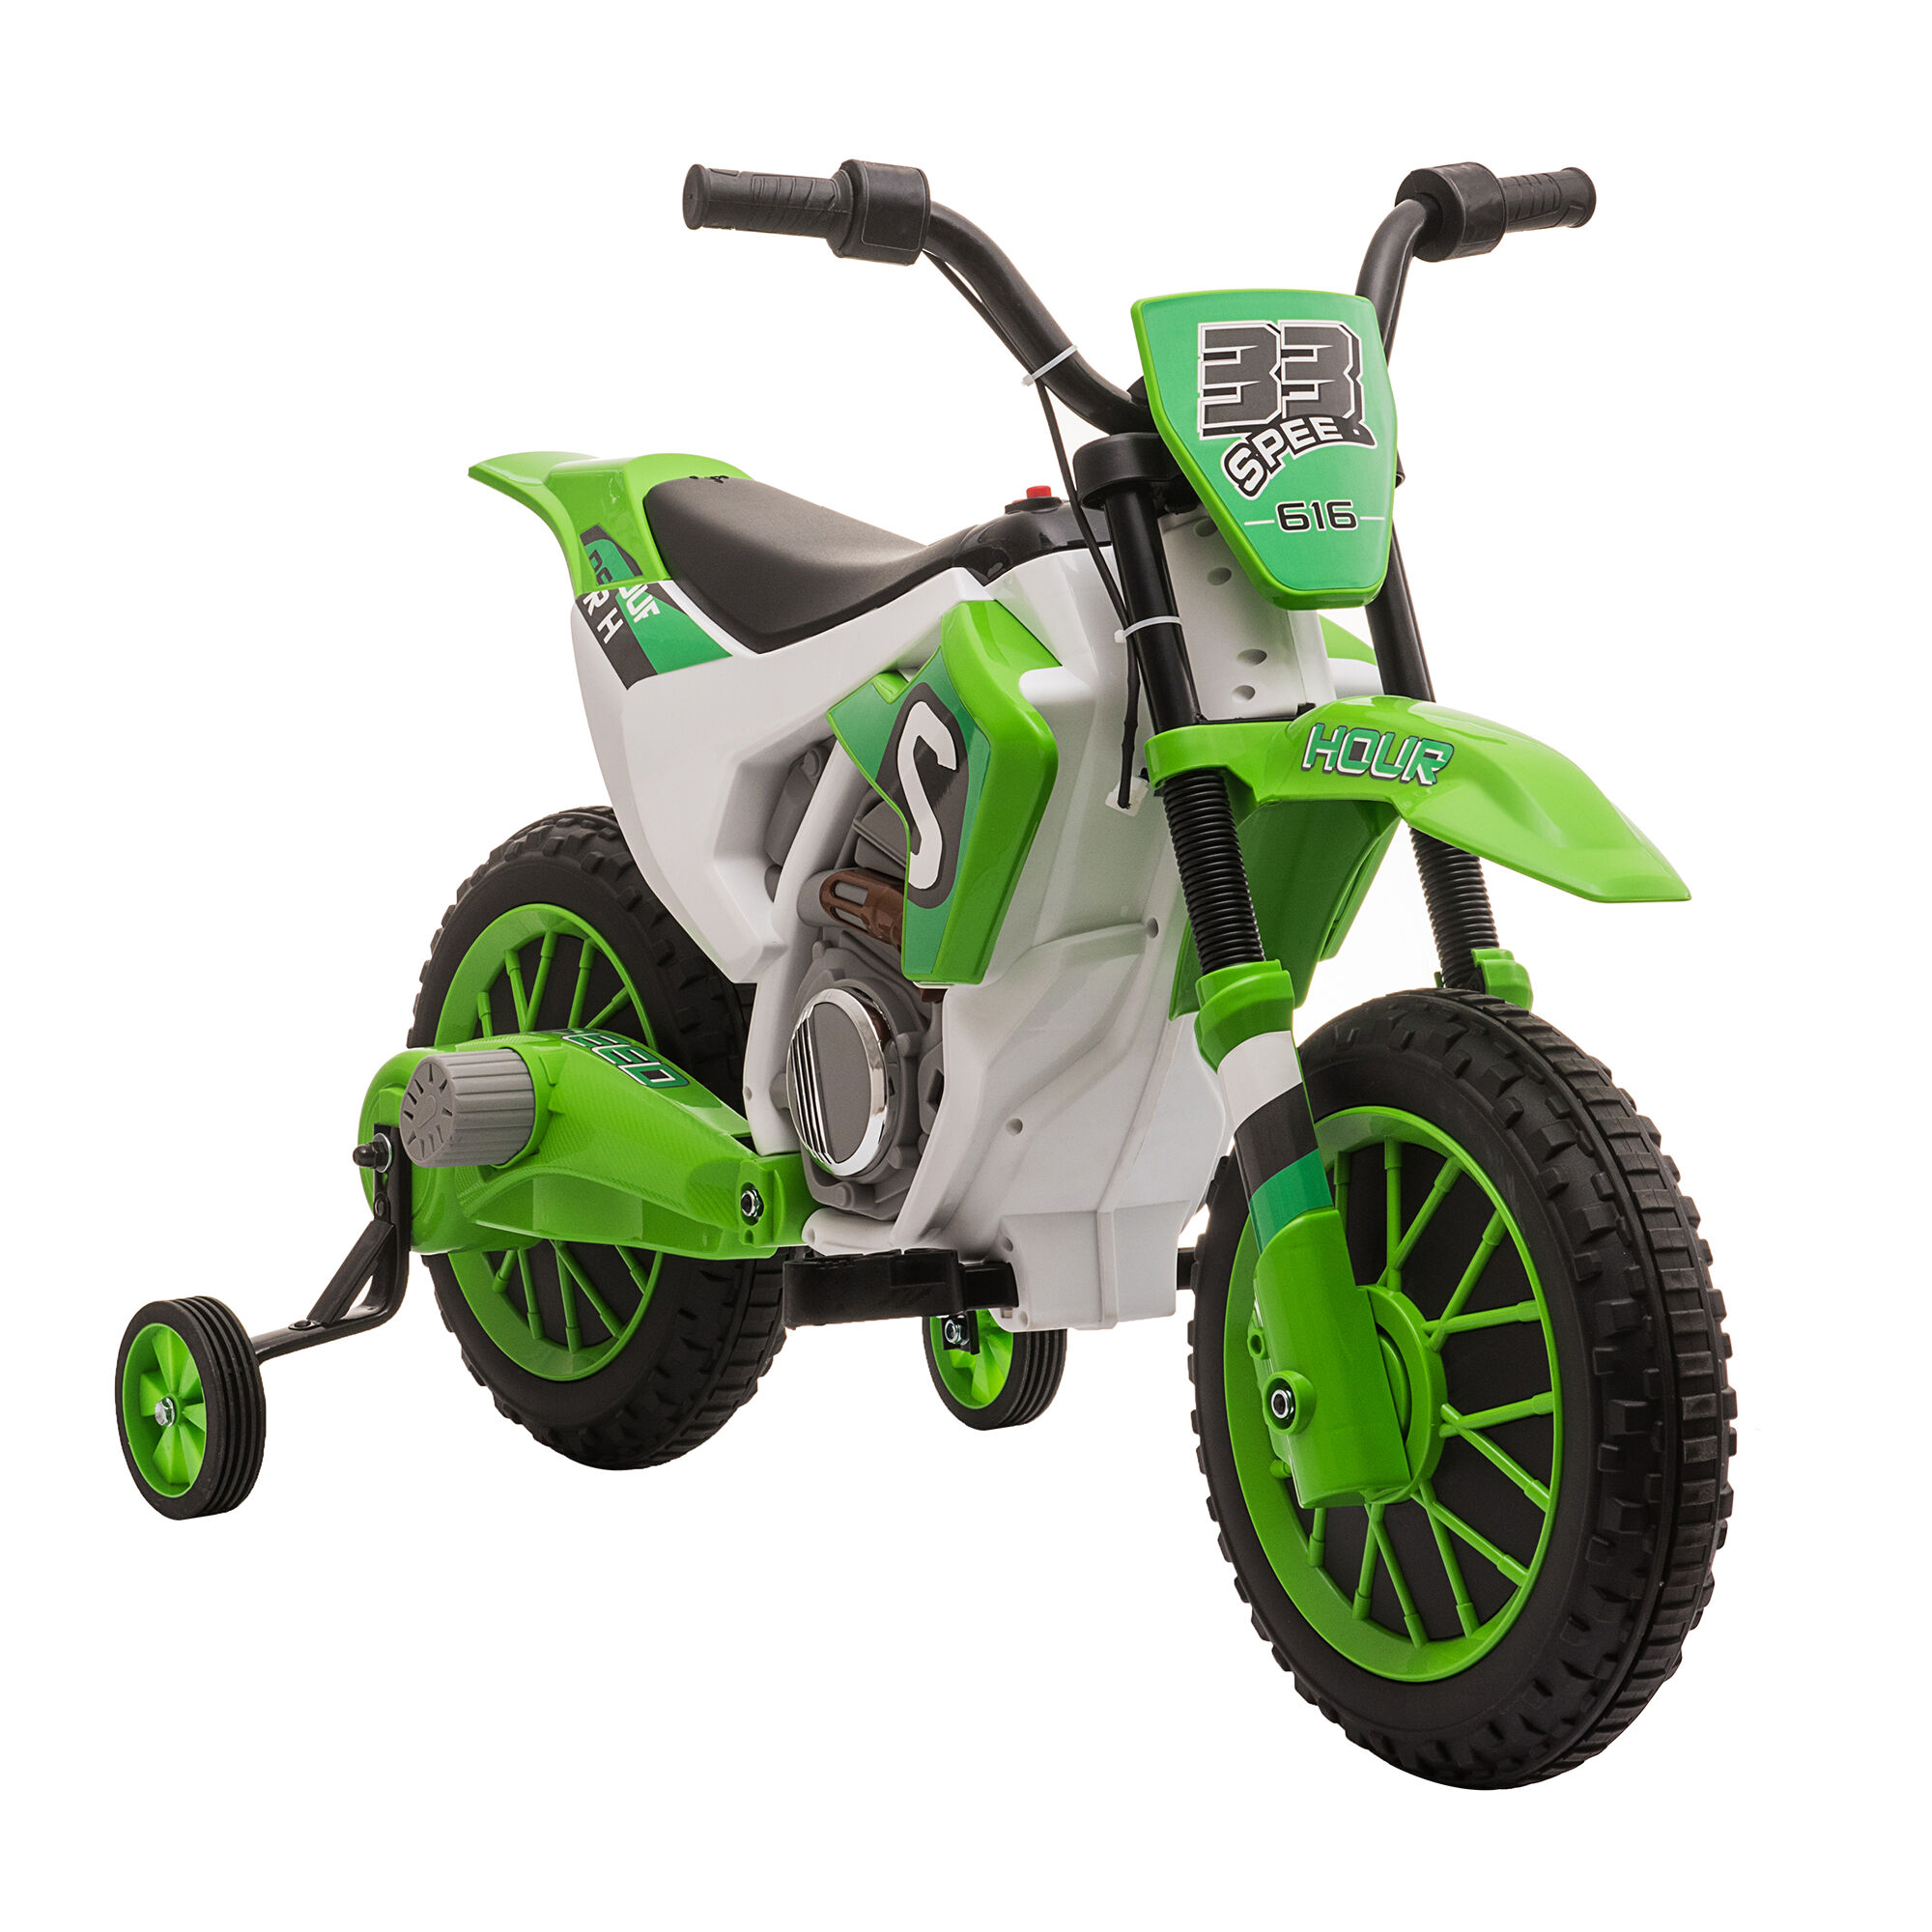 Aosom 12V Electric Motorcycle for Kids Battery-Powered Ride-On Off-road Street Bike with Charging Battery Training Wheels Green   Aosom.com